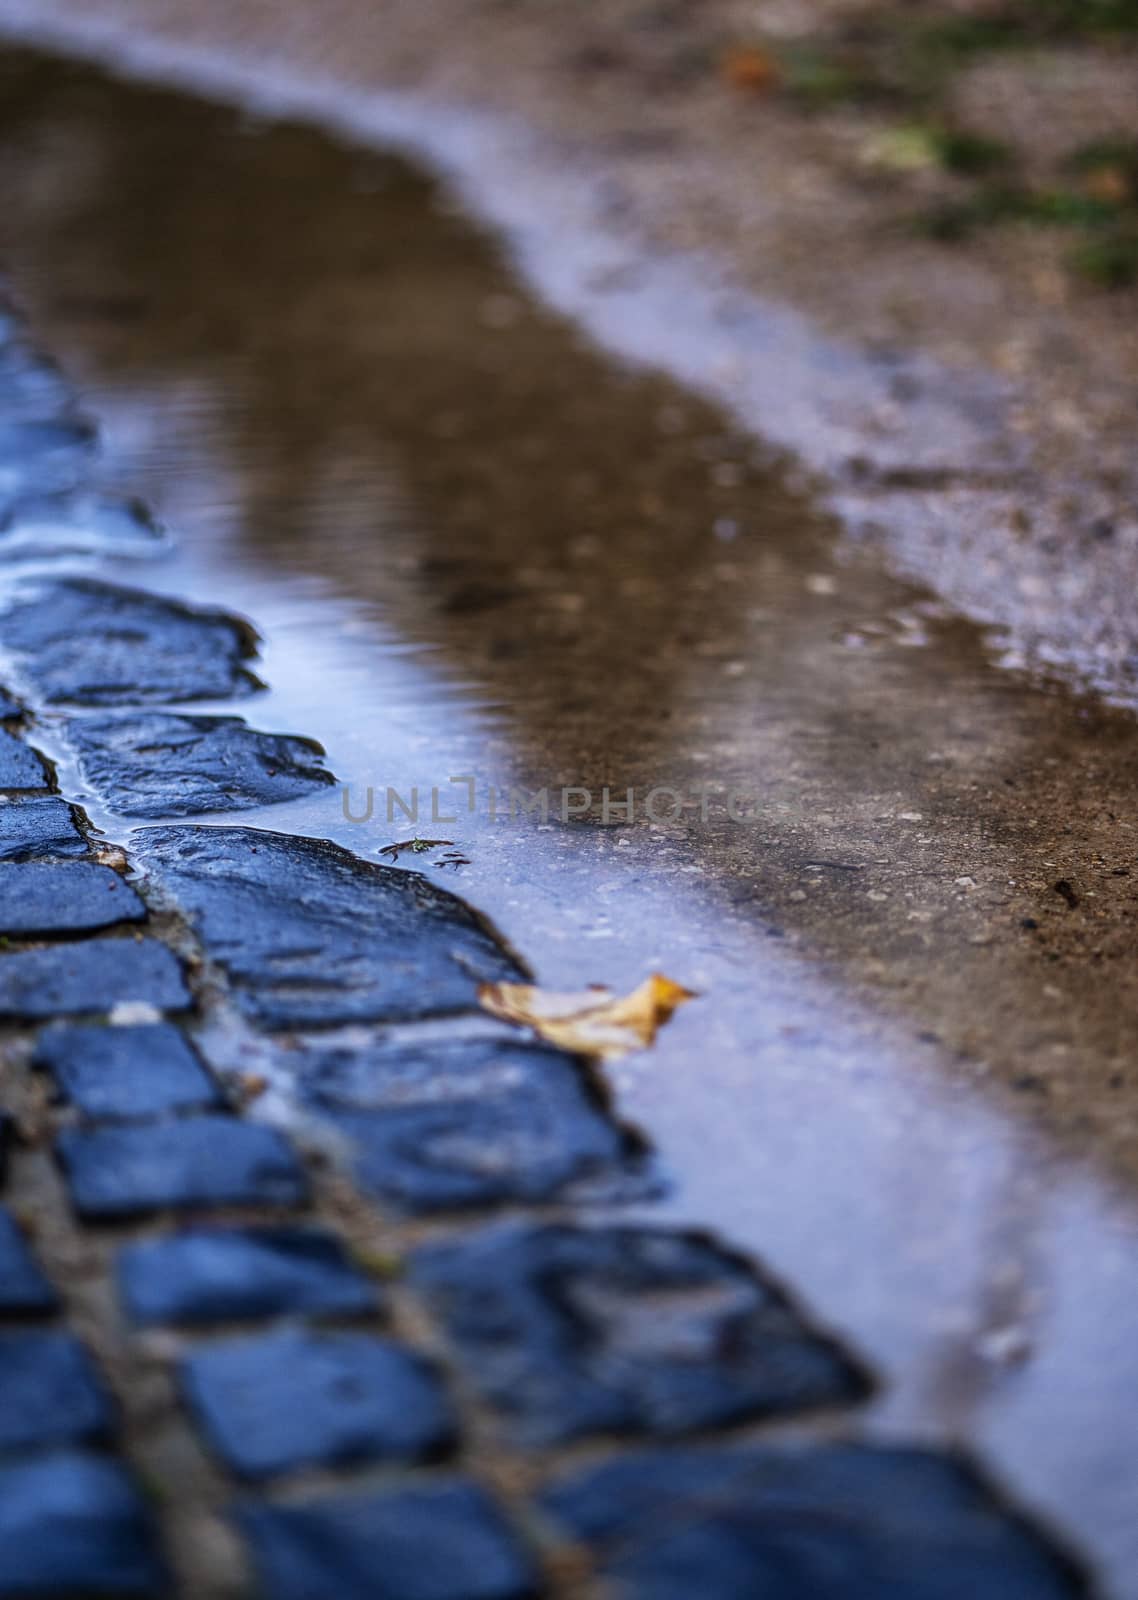 Cobblestones and a puddle of water with a fallen leaf inside.